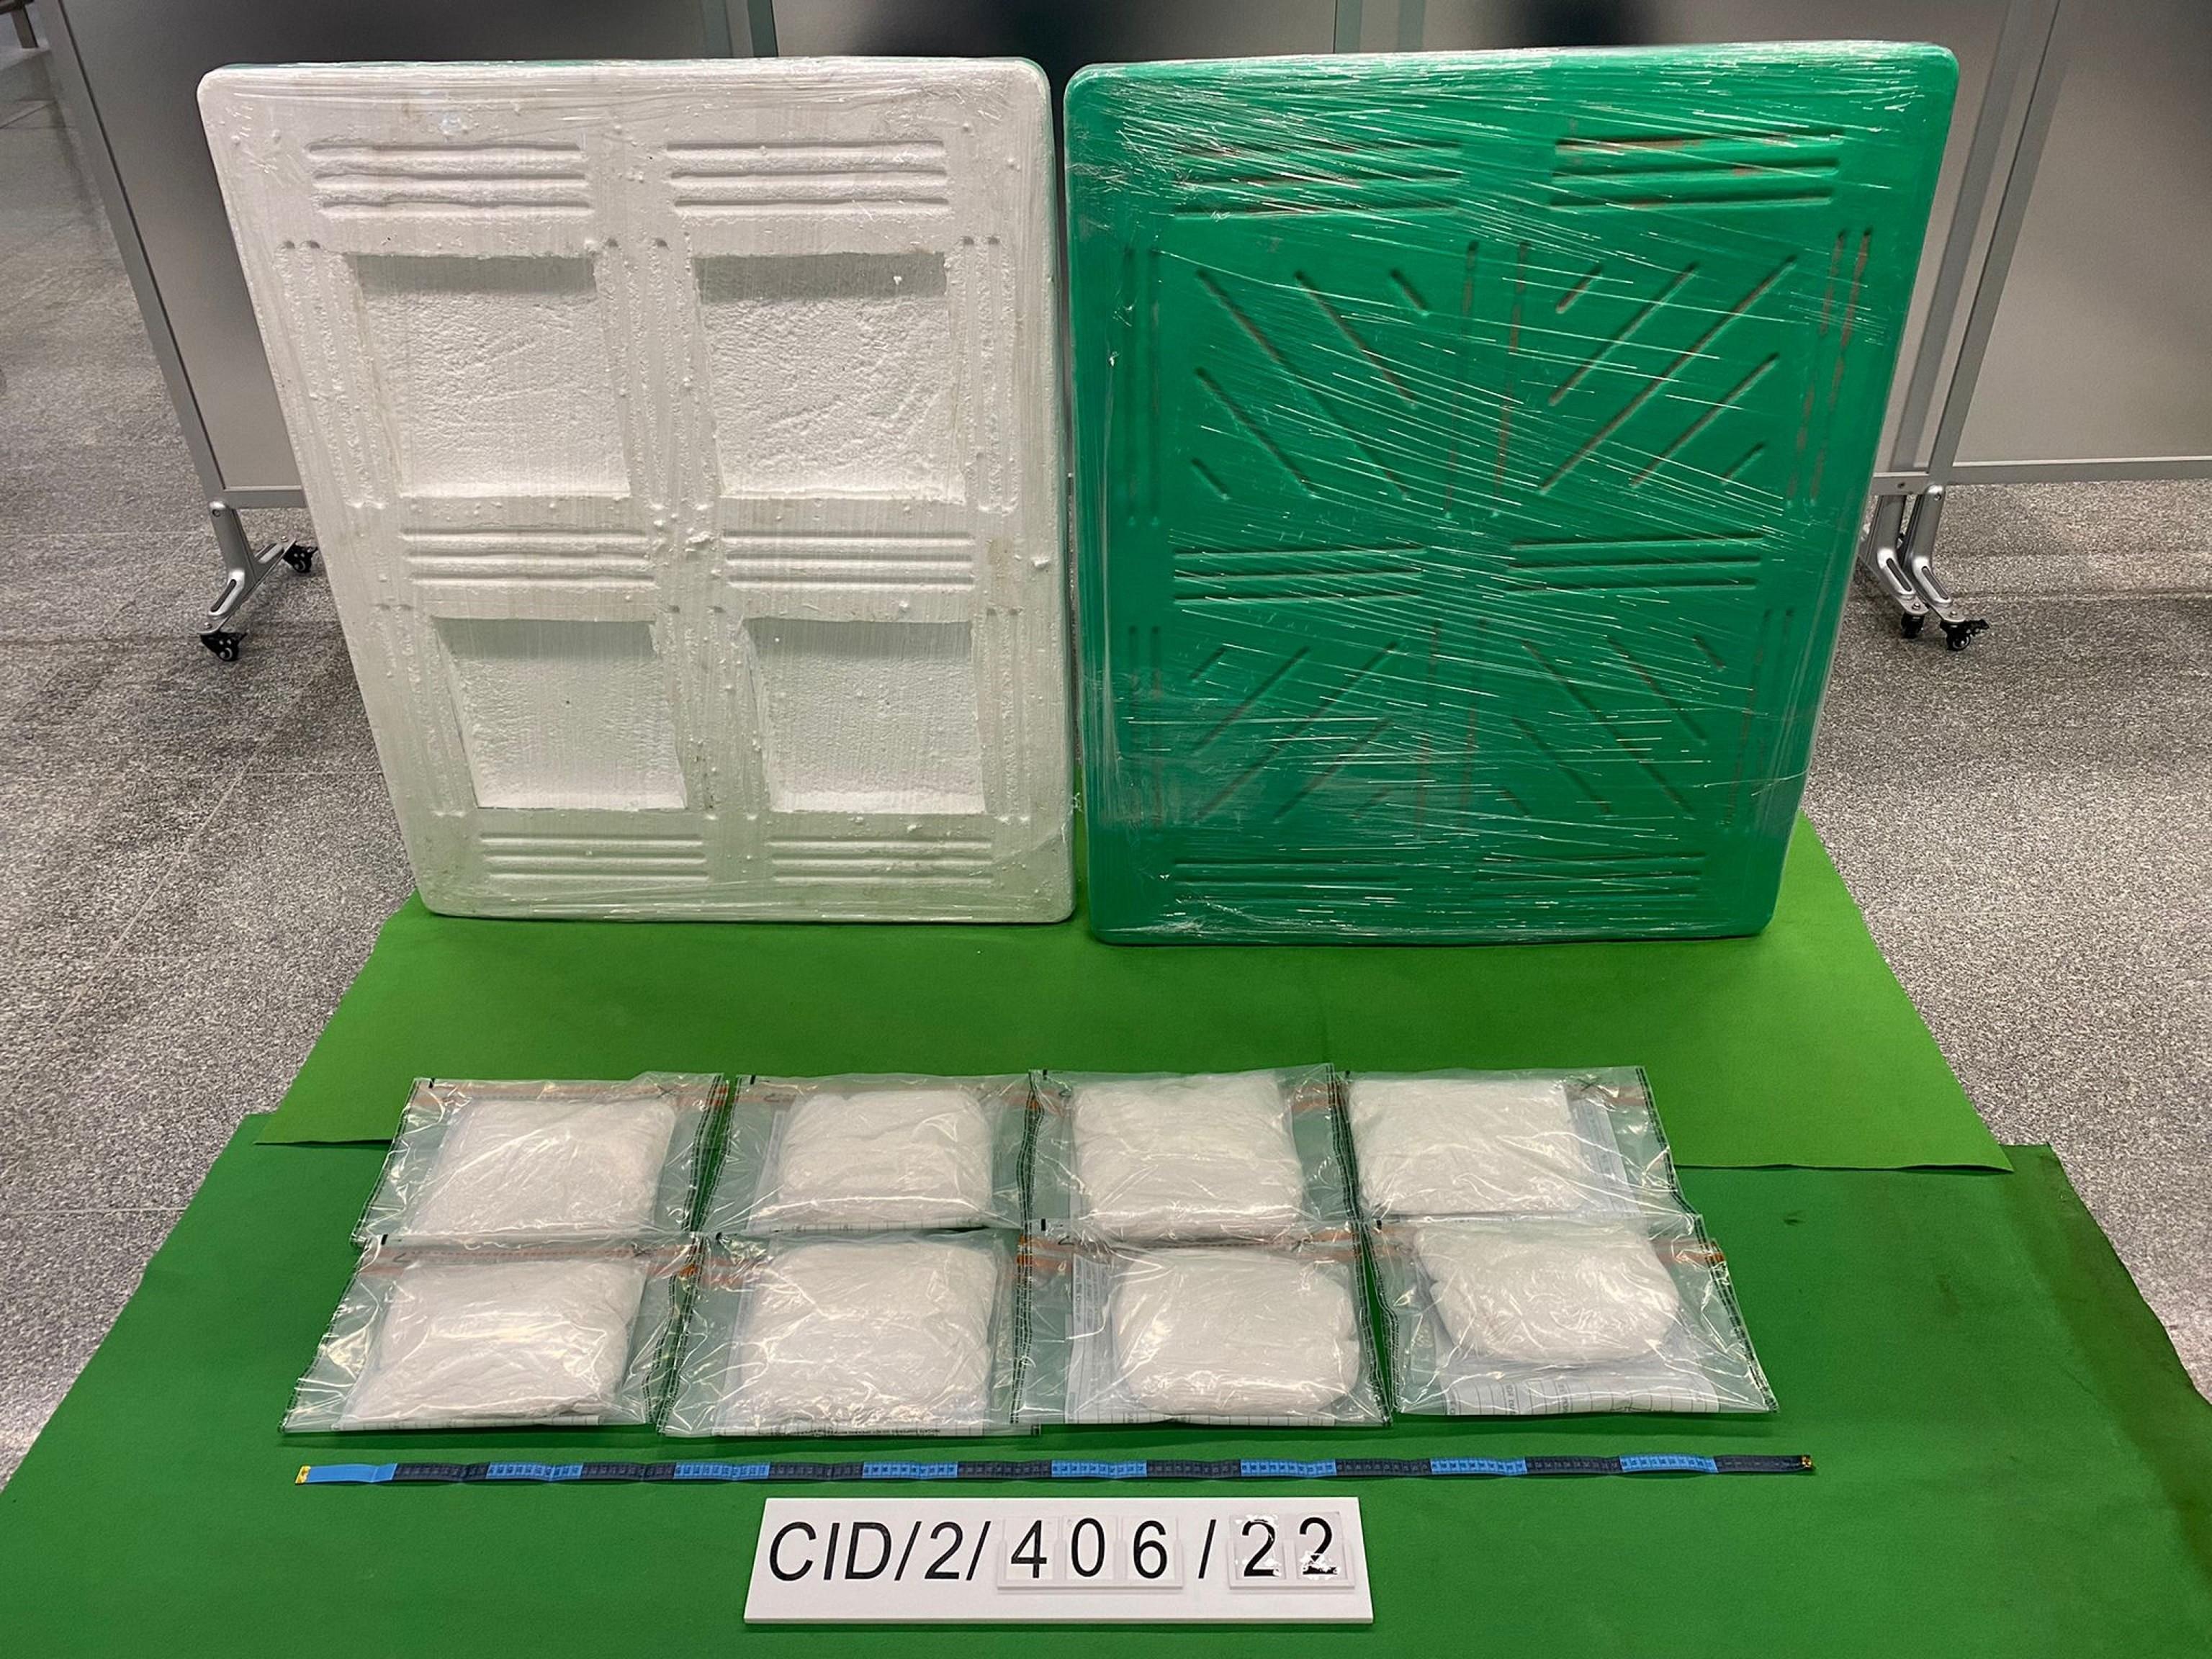 Hong Kong Customs today (October 17) seized about 11 kilograms of suspected ketamine with an estimated market value of about $6.3 million at Hong Kong International Airport. Photo shows the suspected ketamine seized and the plastic pallets used to conceal the drugs.
